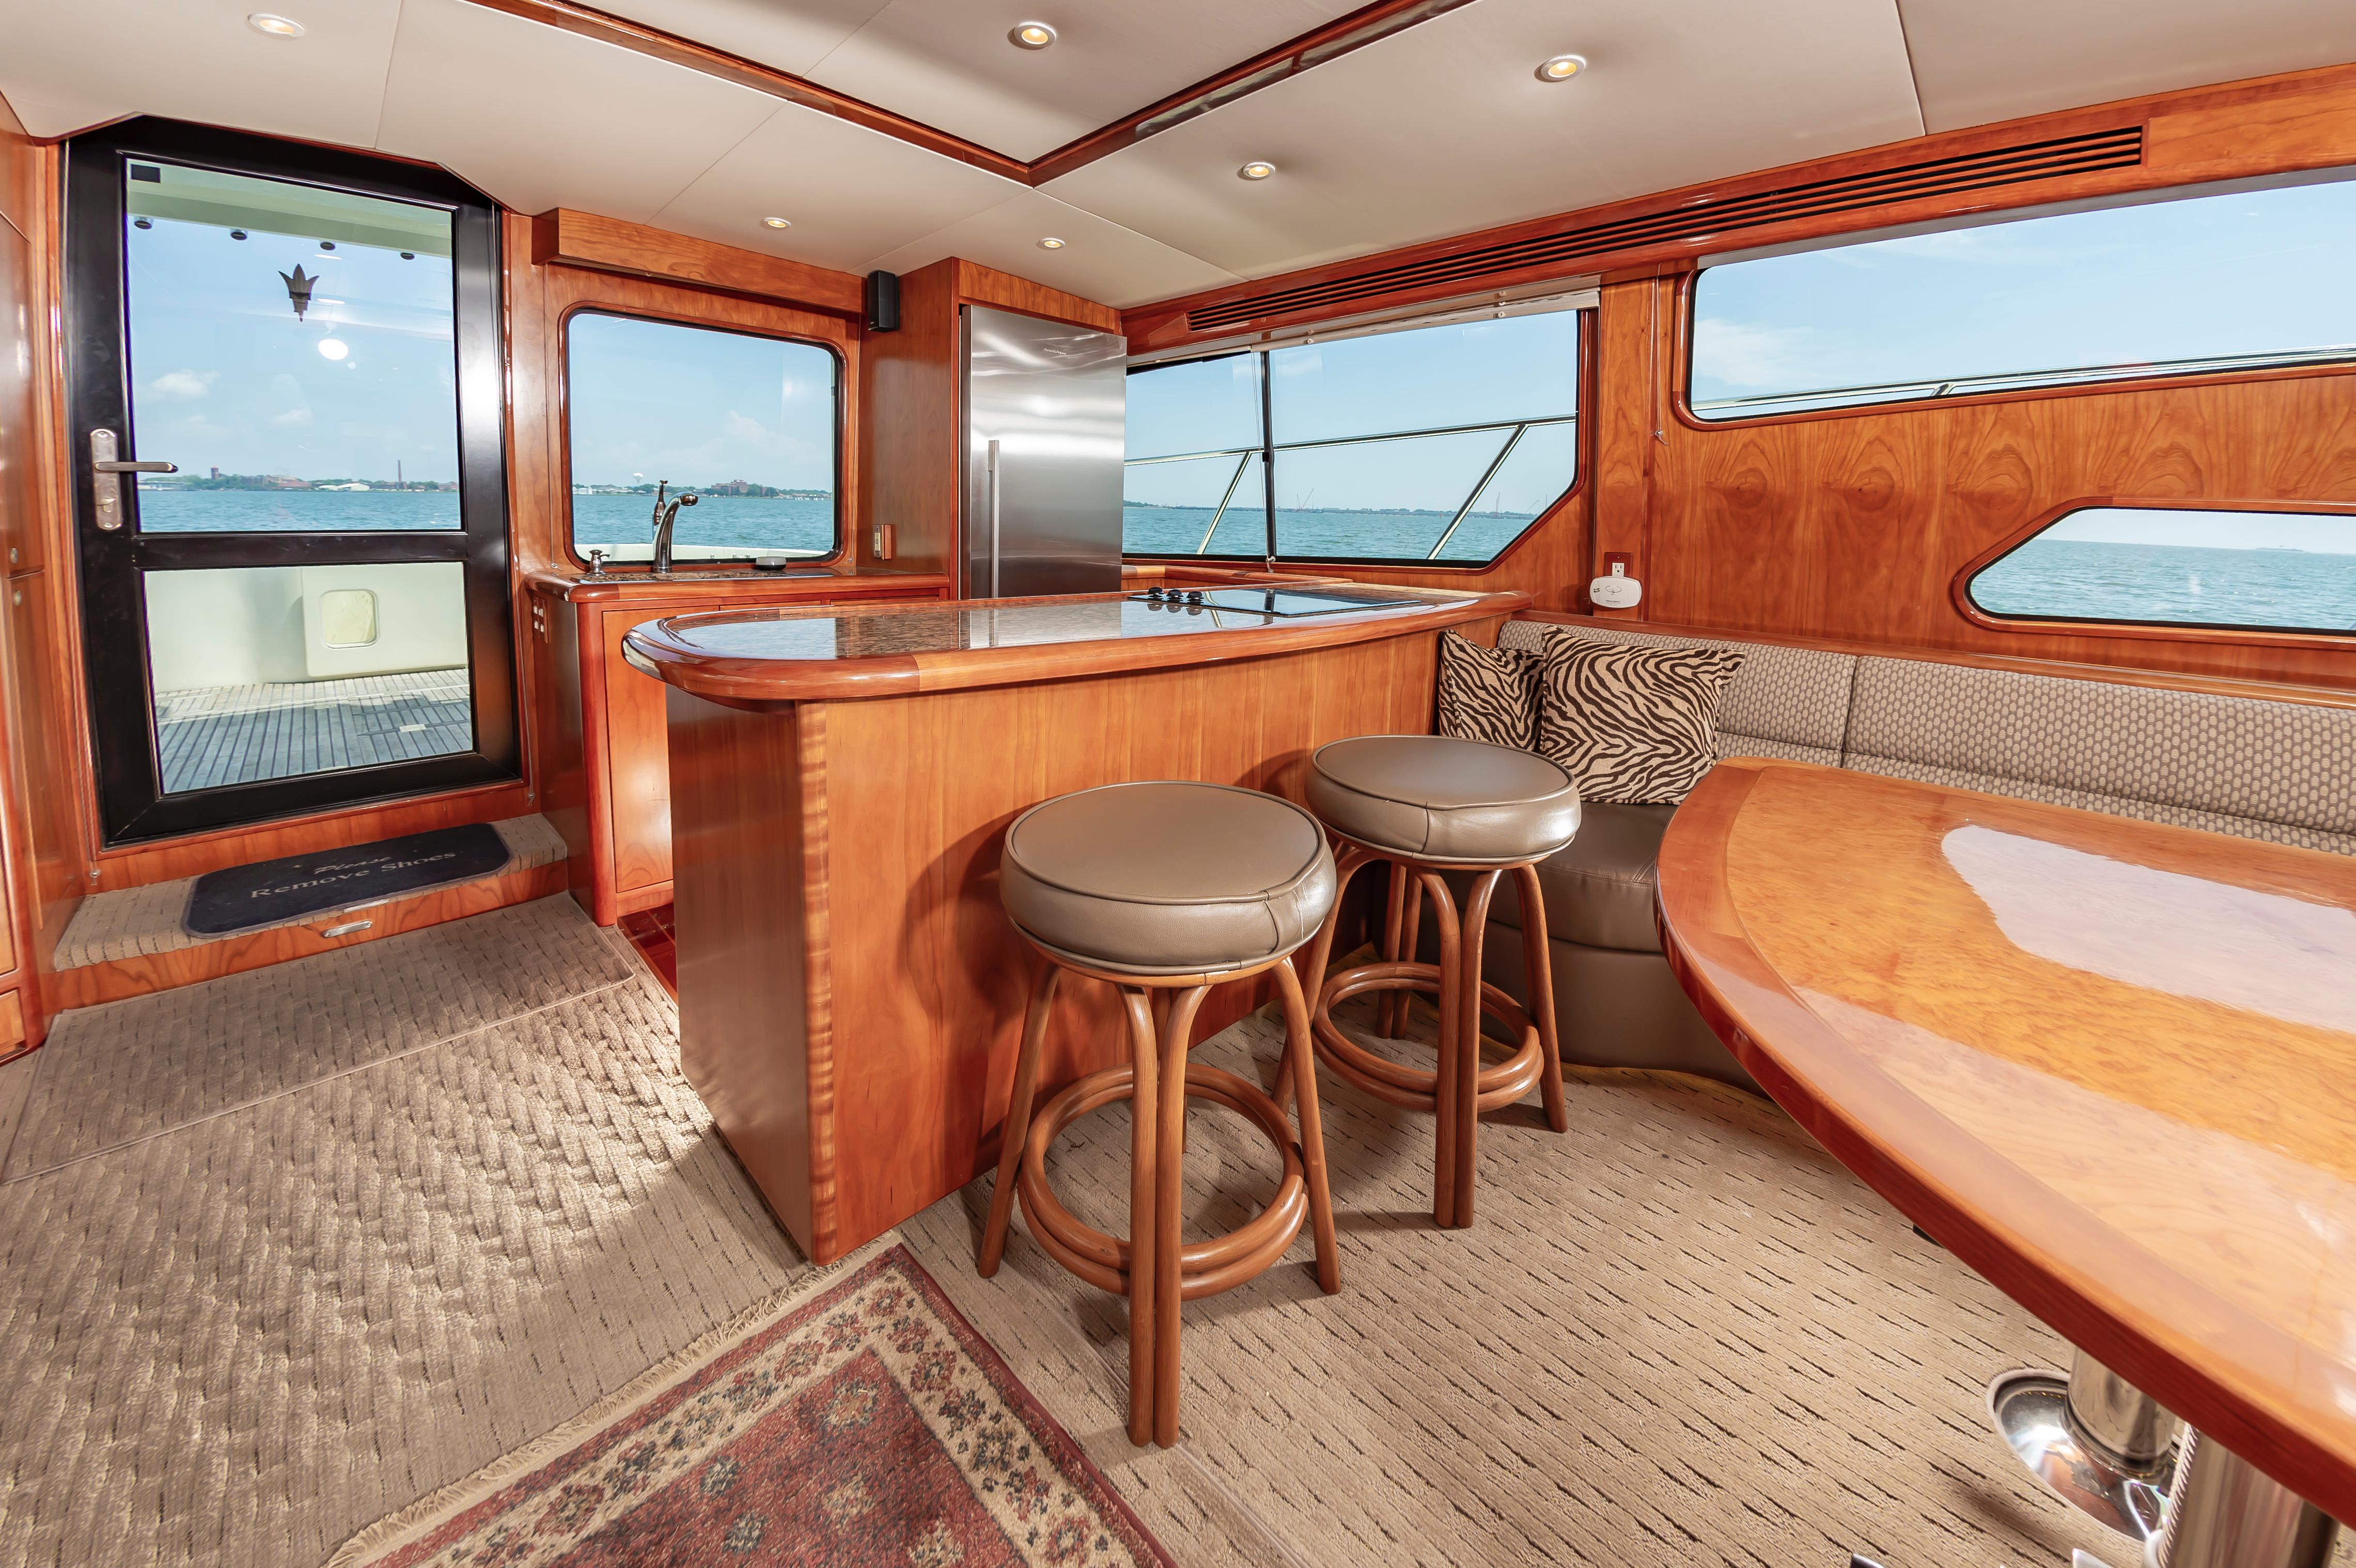 2016 Mikelson 50' S/F, Galley Counter and stools